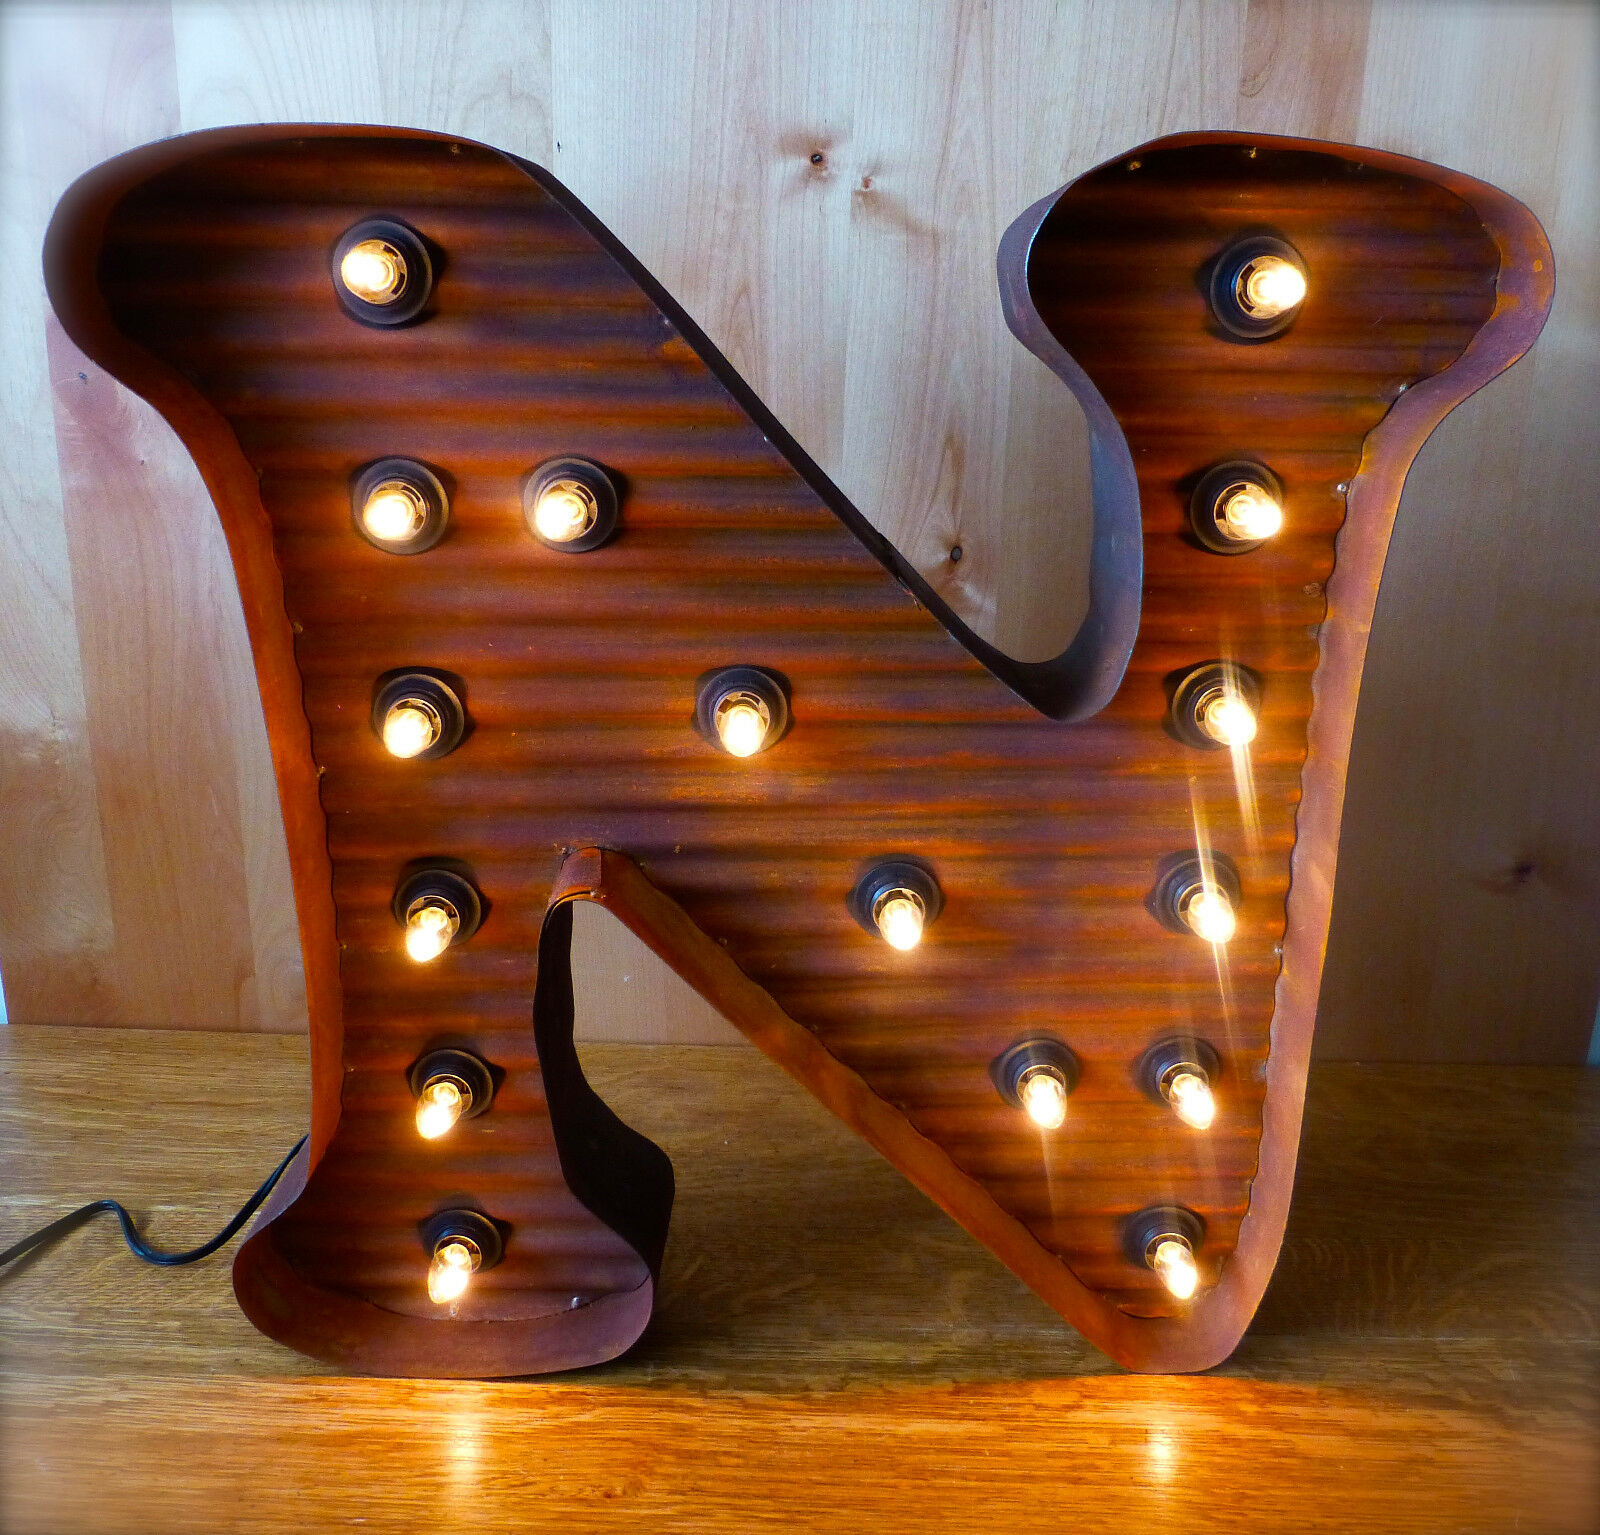 Lg Brown Vintage Style Light Up Marquee Letter N, 24" Tall Novelty Metal Sign